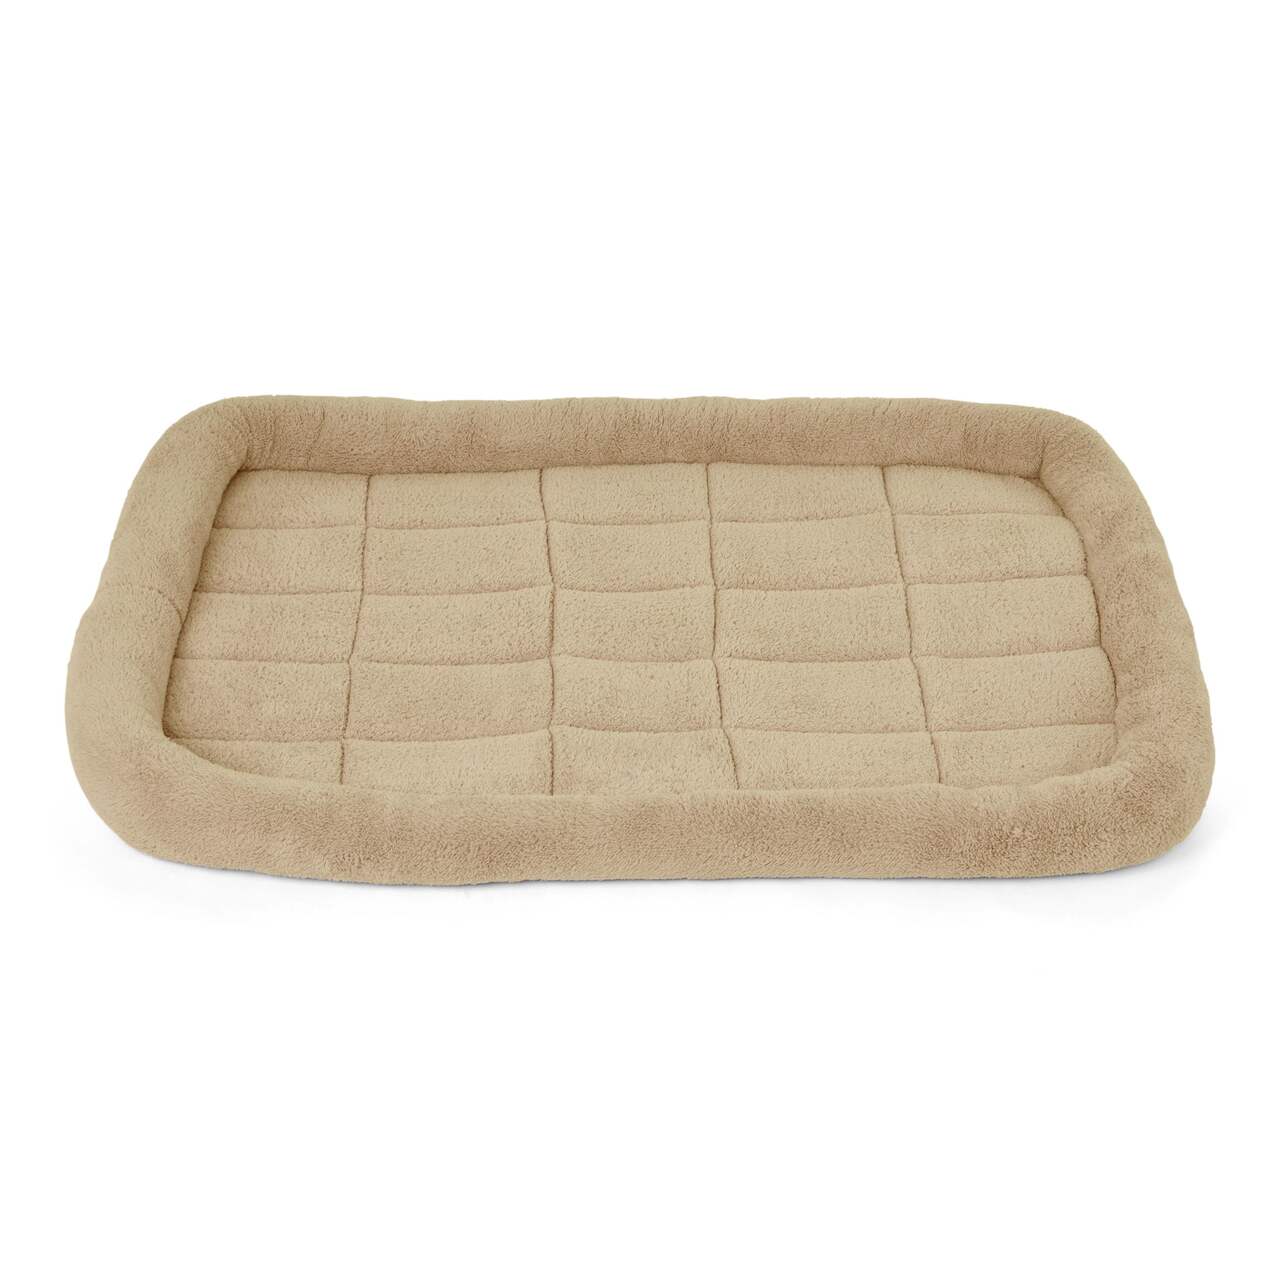 https://media-www.canadiantire.ca/product/living/pet-care/pet-accessories/1427505/petco-cream-crate-mat-with-bolsters-extra-large-5902e9f2-b669-4f3d-95b6-4b803aed4d7b-jpgrendition.jpg?imdensity=1&imwidth=640&impolicy=mZoom